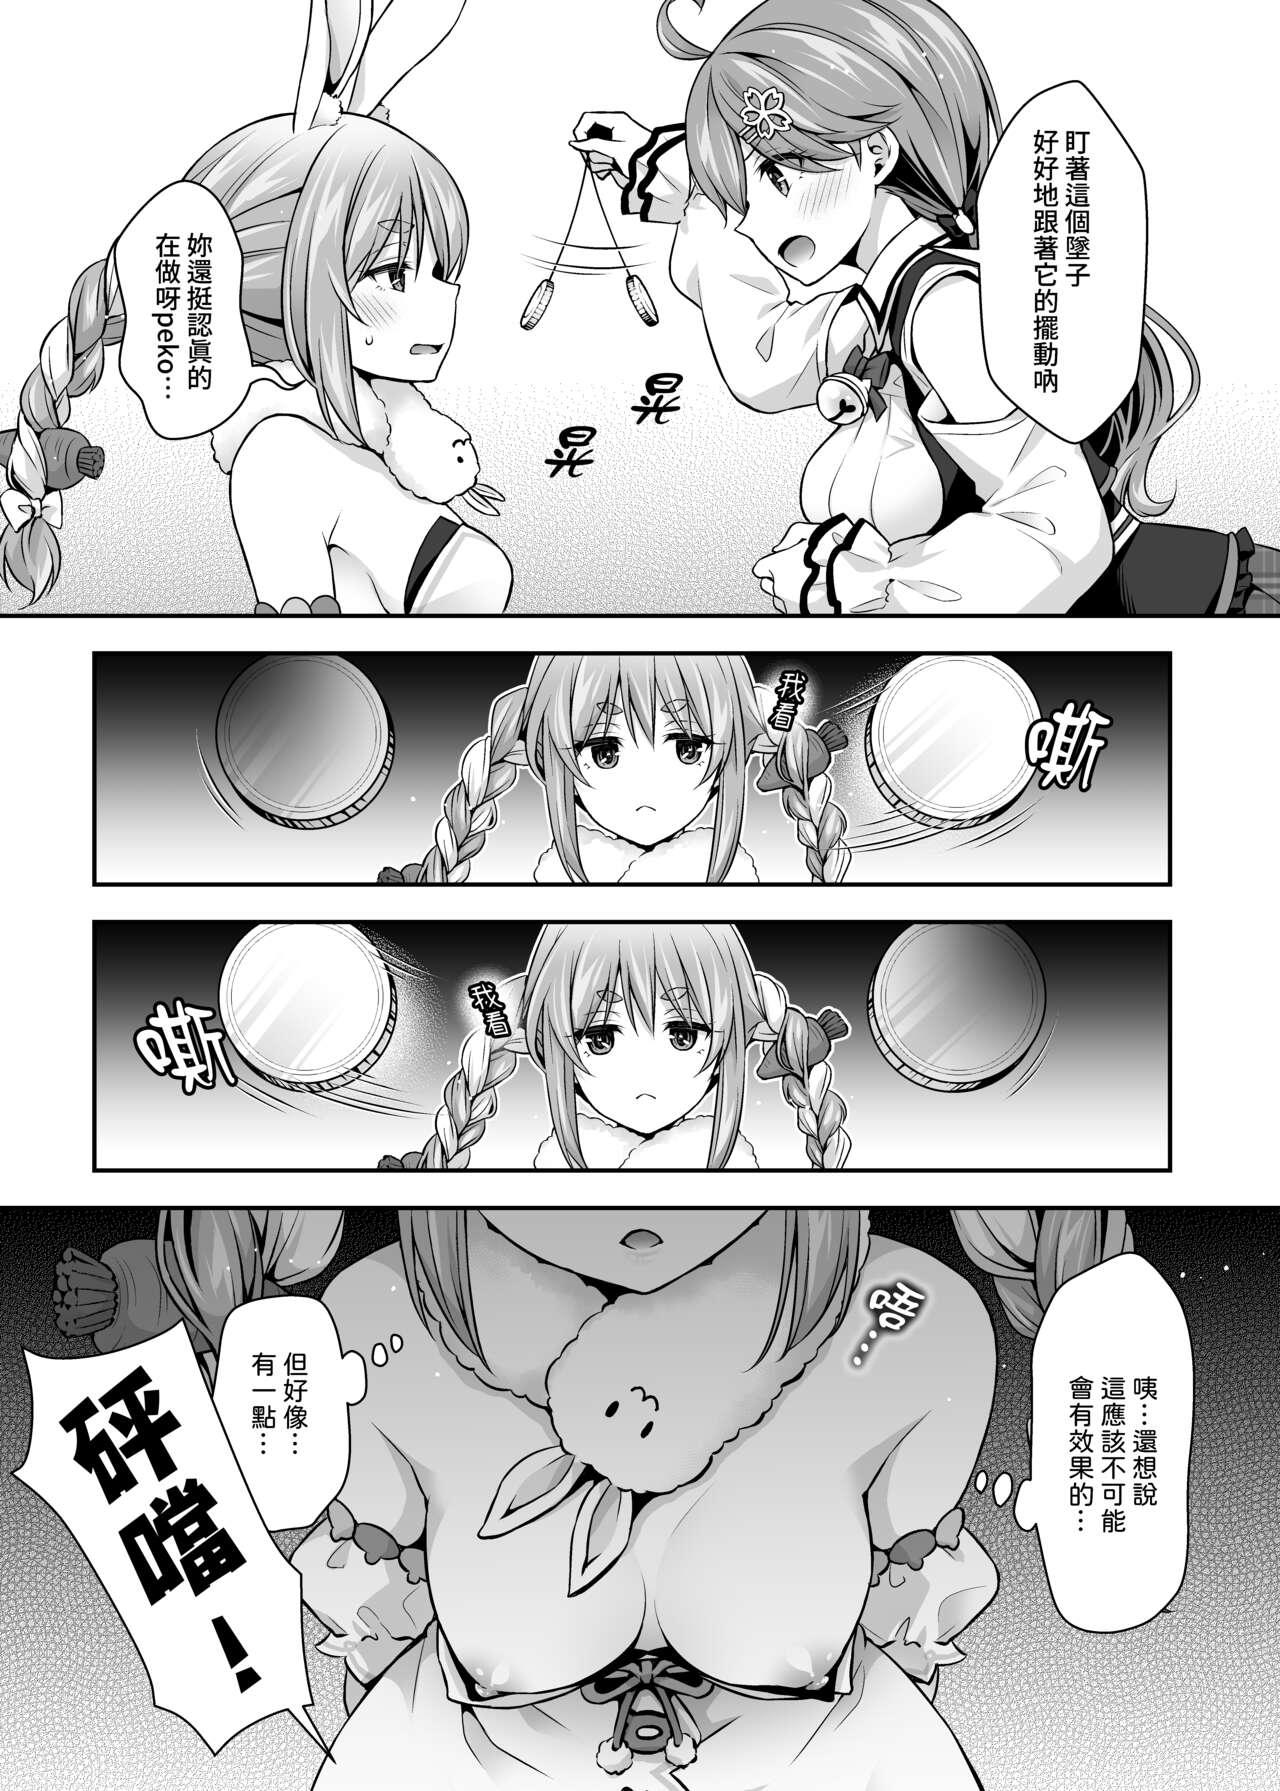 Solo Girl みこち催眠えっち本2 ～悪魔的所業編～ - Hololive Cheerleader - Page 9